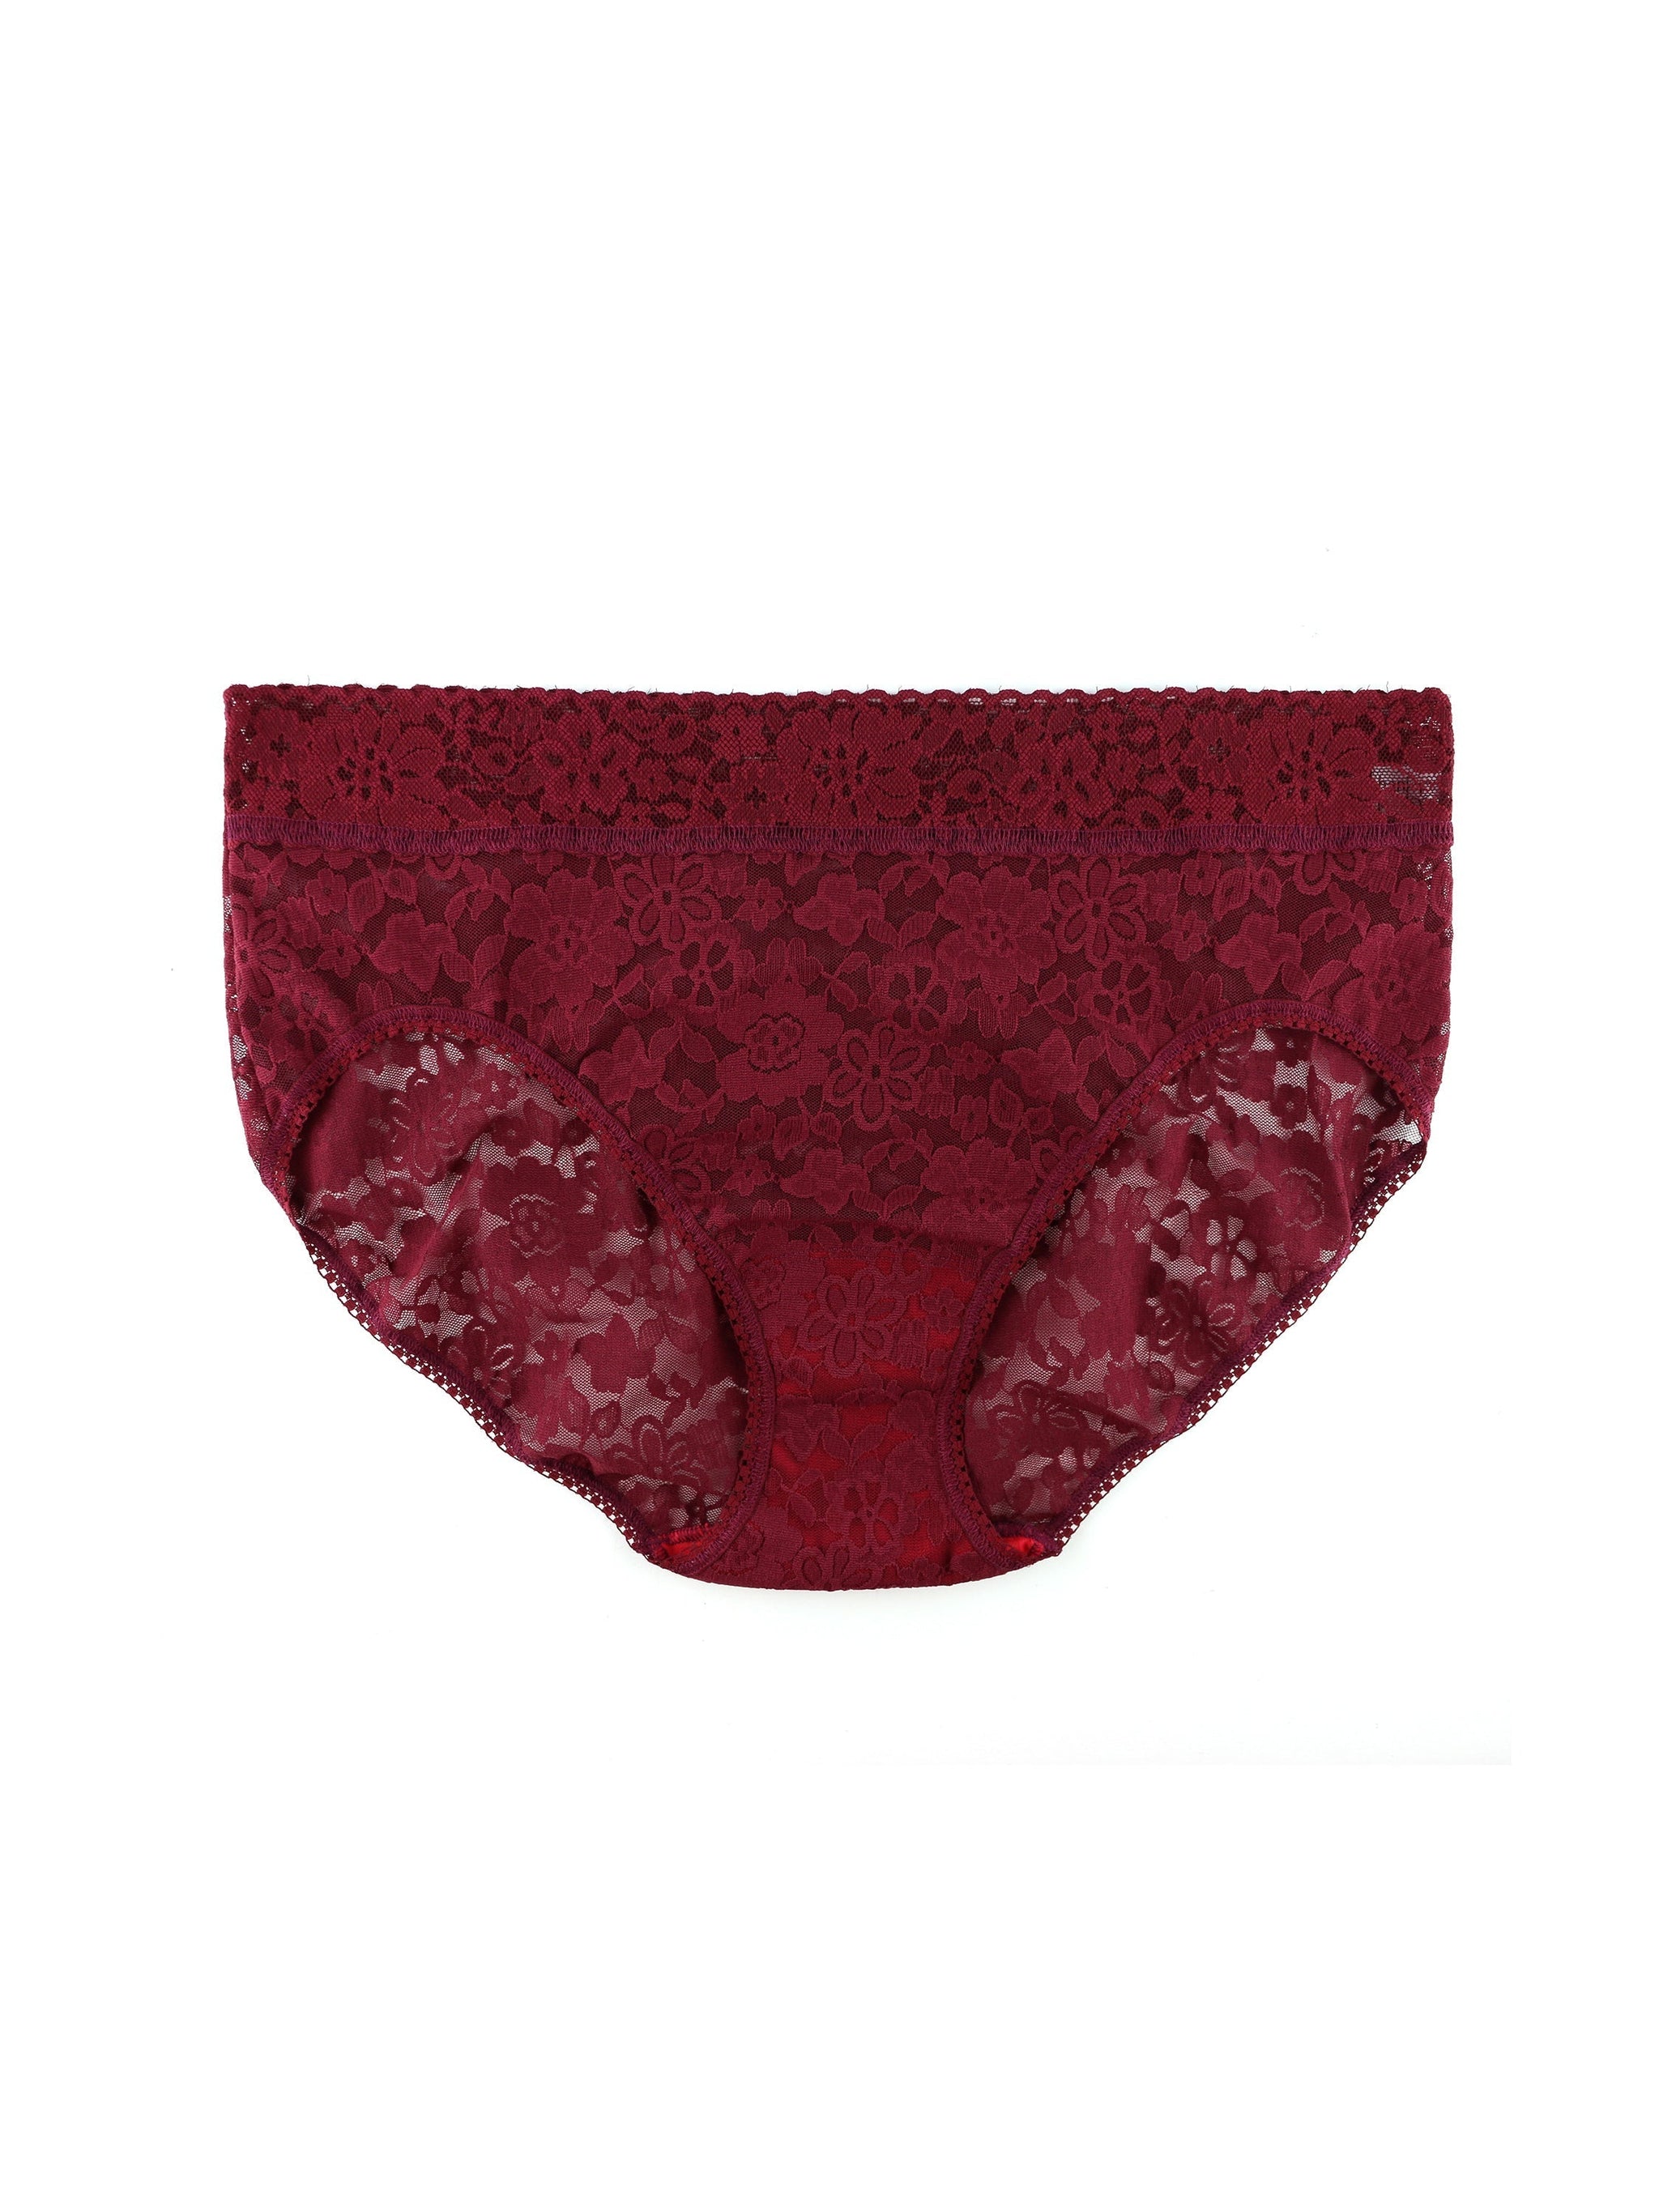 Daily Lace™ Plus Size French Brief Lipstick Red